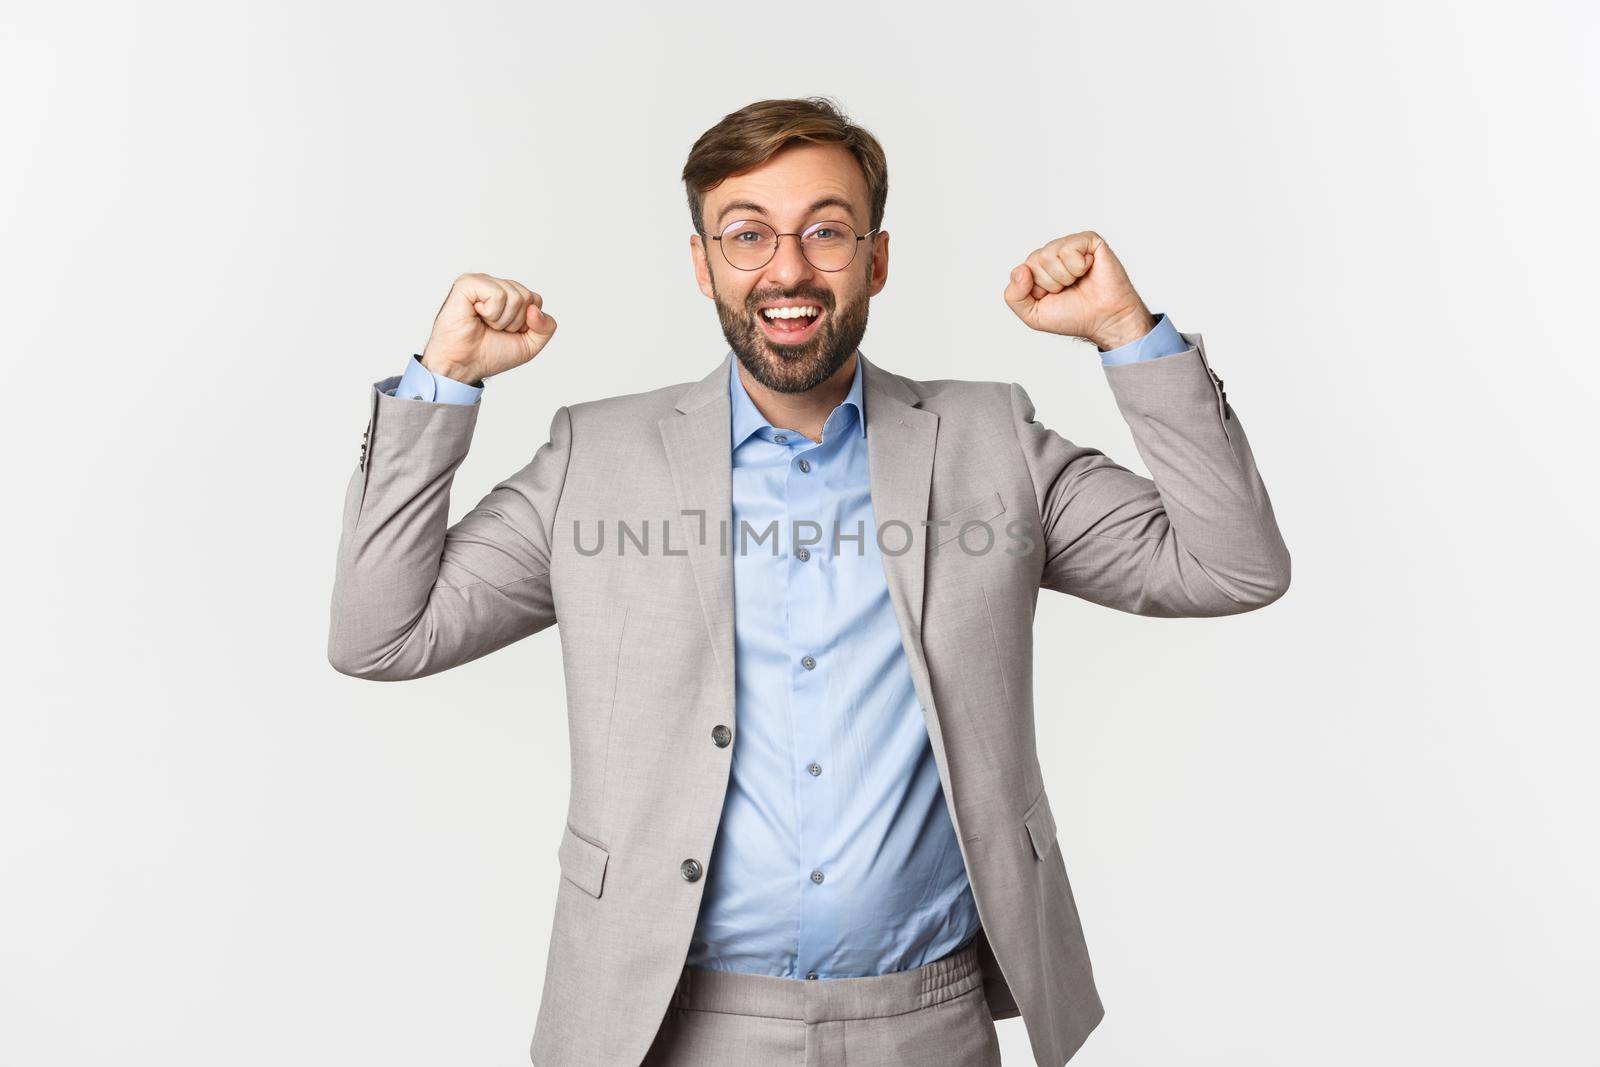 Portrait of happy businessman with beard, wearing grey suit and glasses, raising hands up in hooray gesture, saying yes and rejoicing, celebrating victory or achievement, white background.